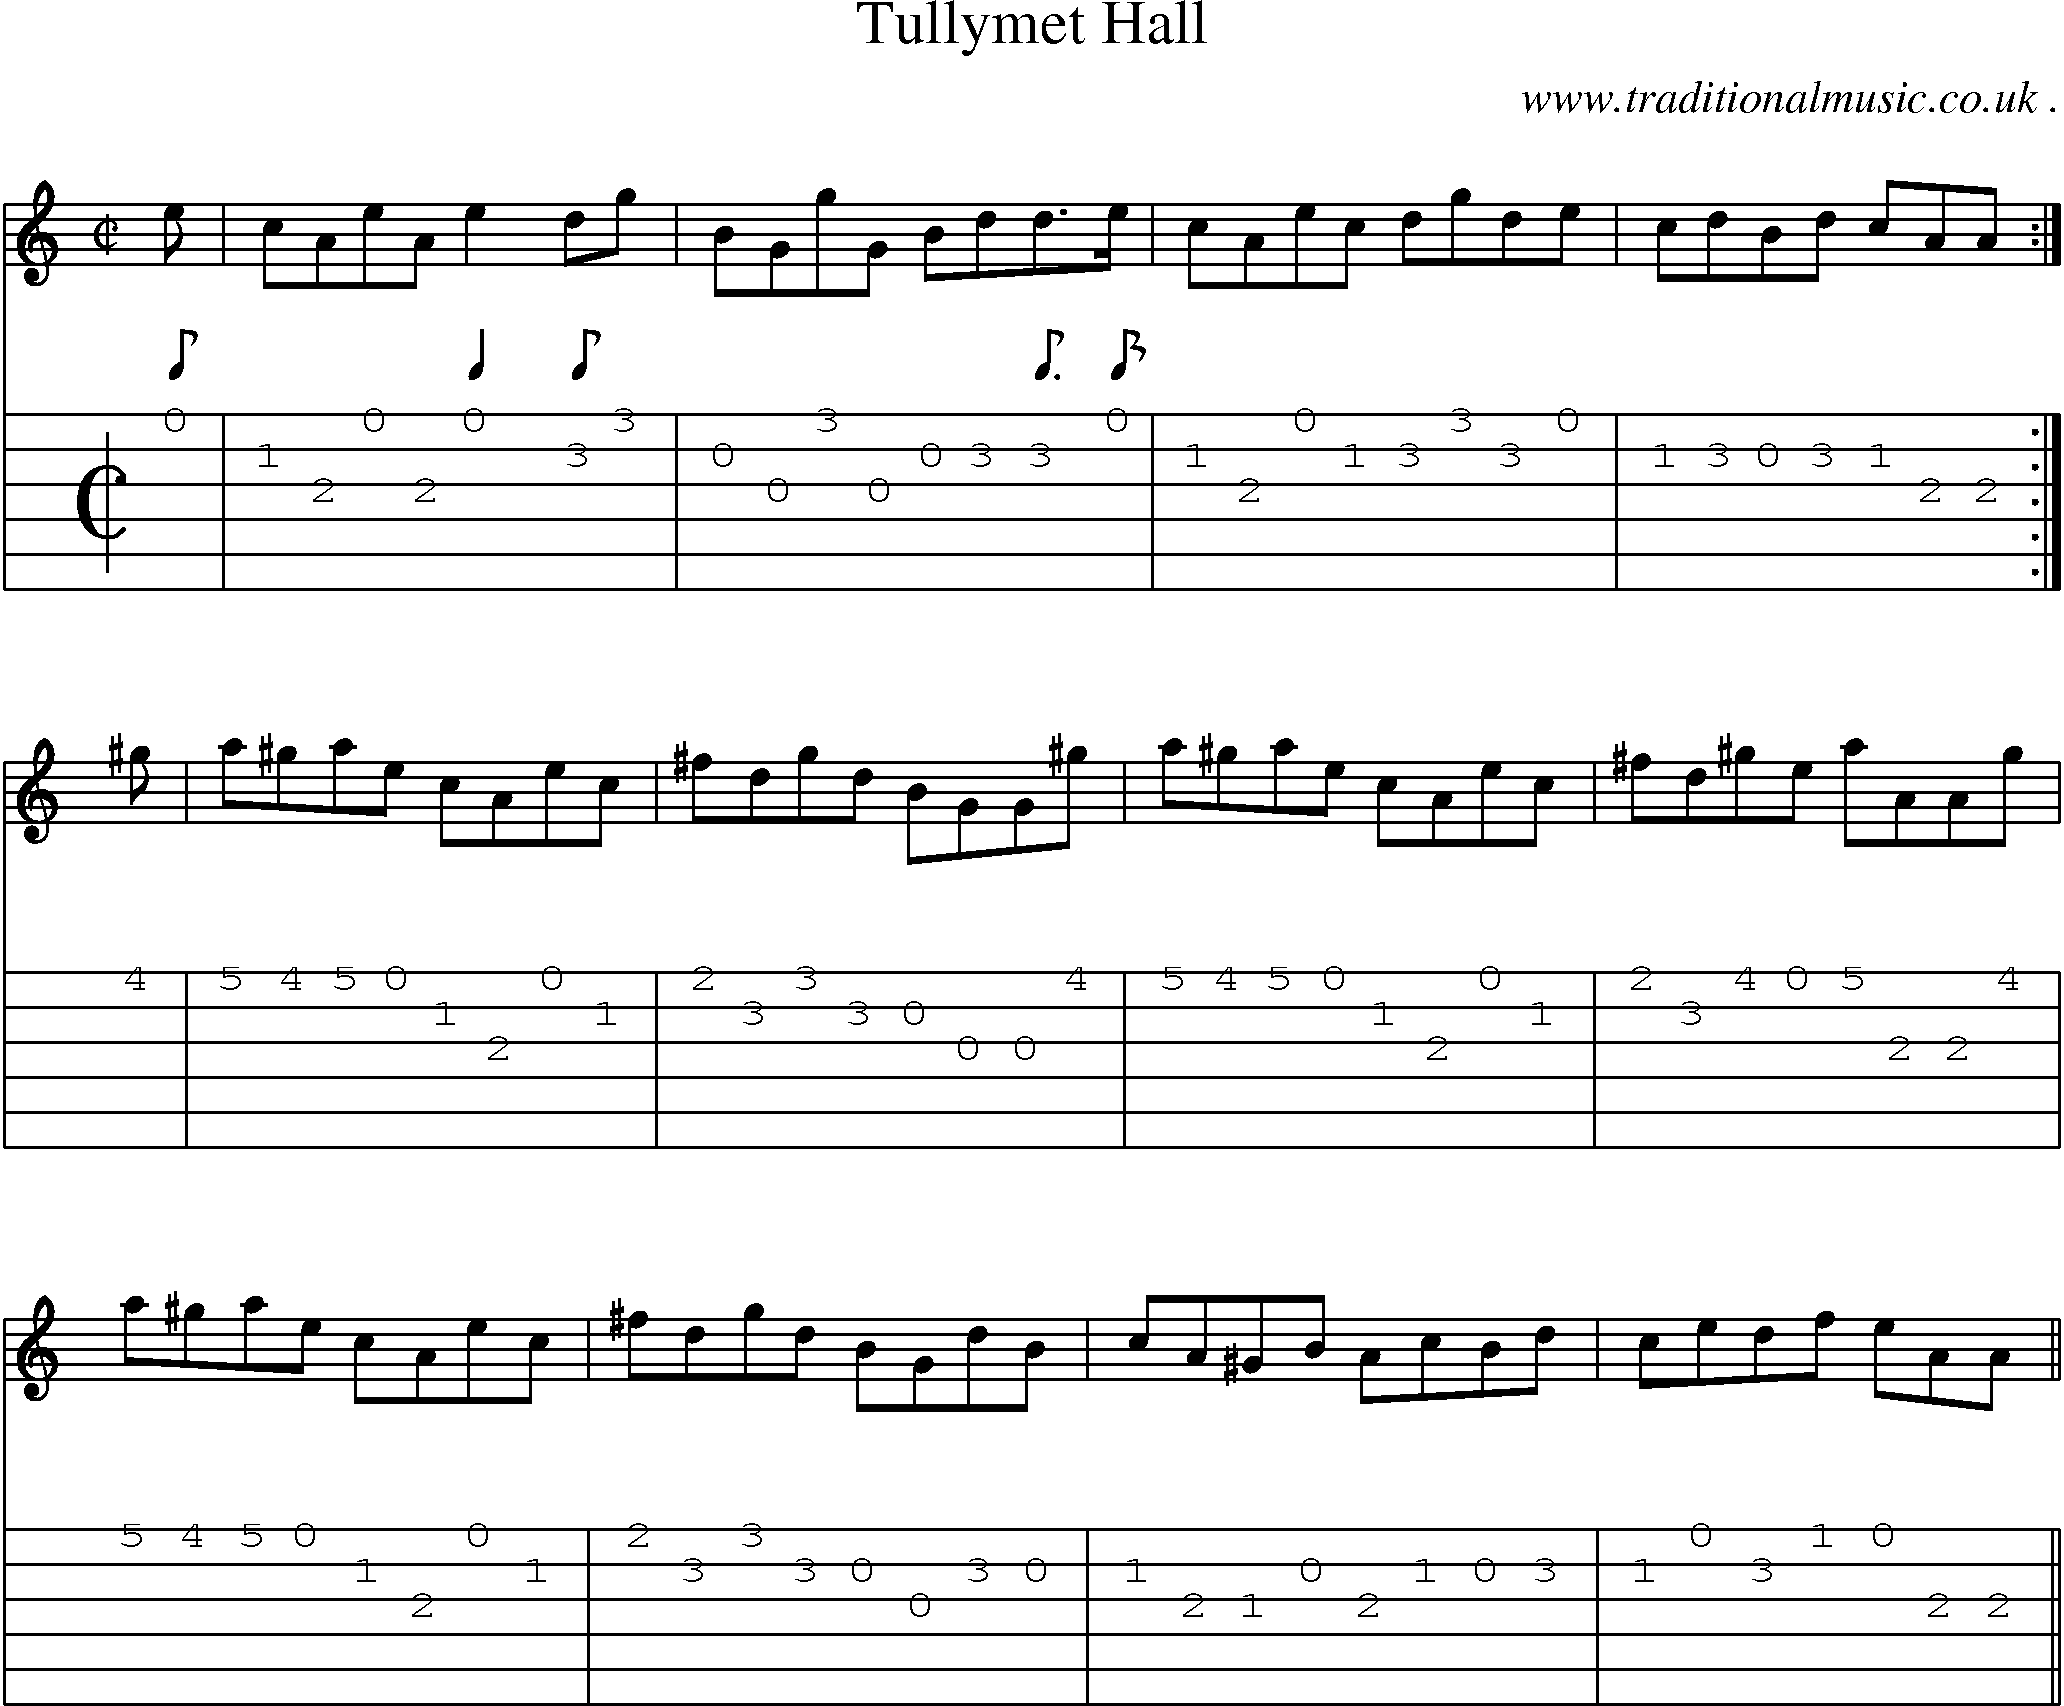 Sheet-music  score, Chords and Guitar Tabs for Tullymet Hall